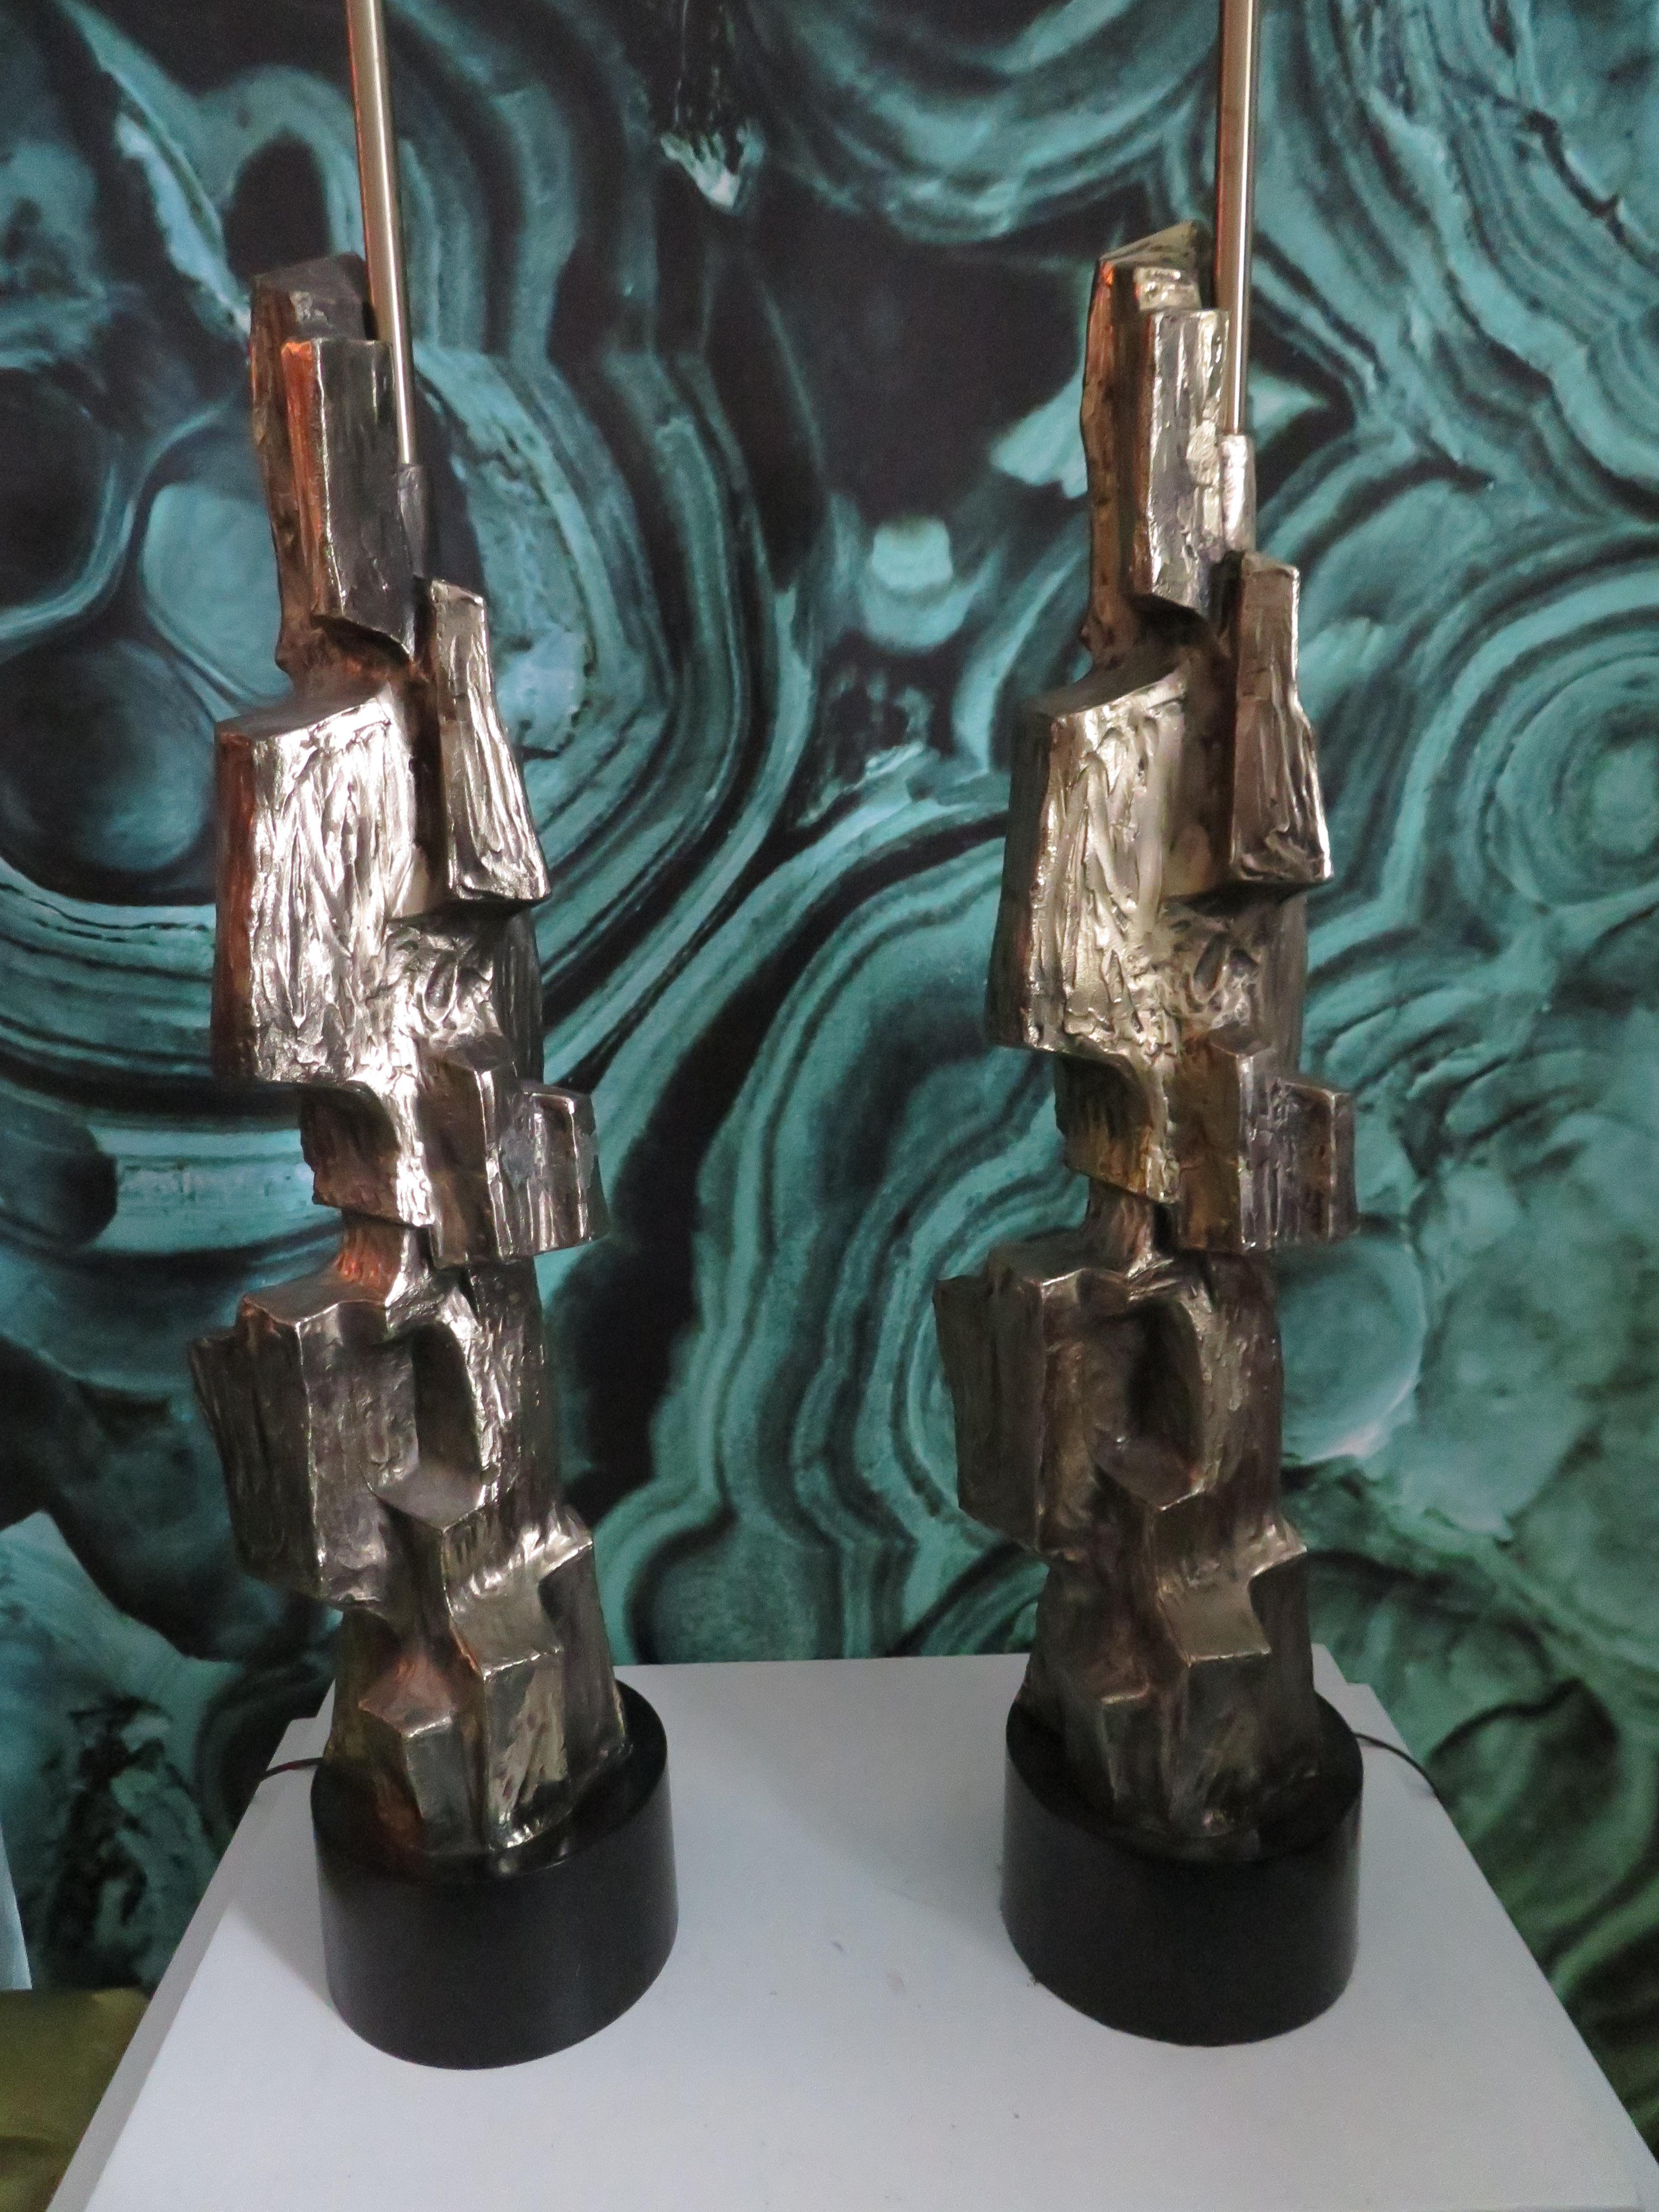 Gorgeous pair of Brutalist table lamps designed by Laurel Lamp Company, 1970s. These are what I like to call the Holy Grail of Laurel Lamps. These amazing lamps command attention in any setting. Try putting a pair of jeweled tone purple drum shades